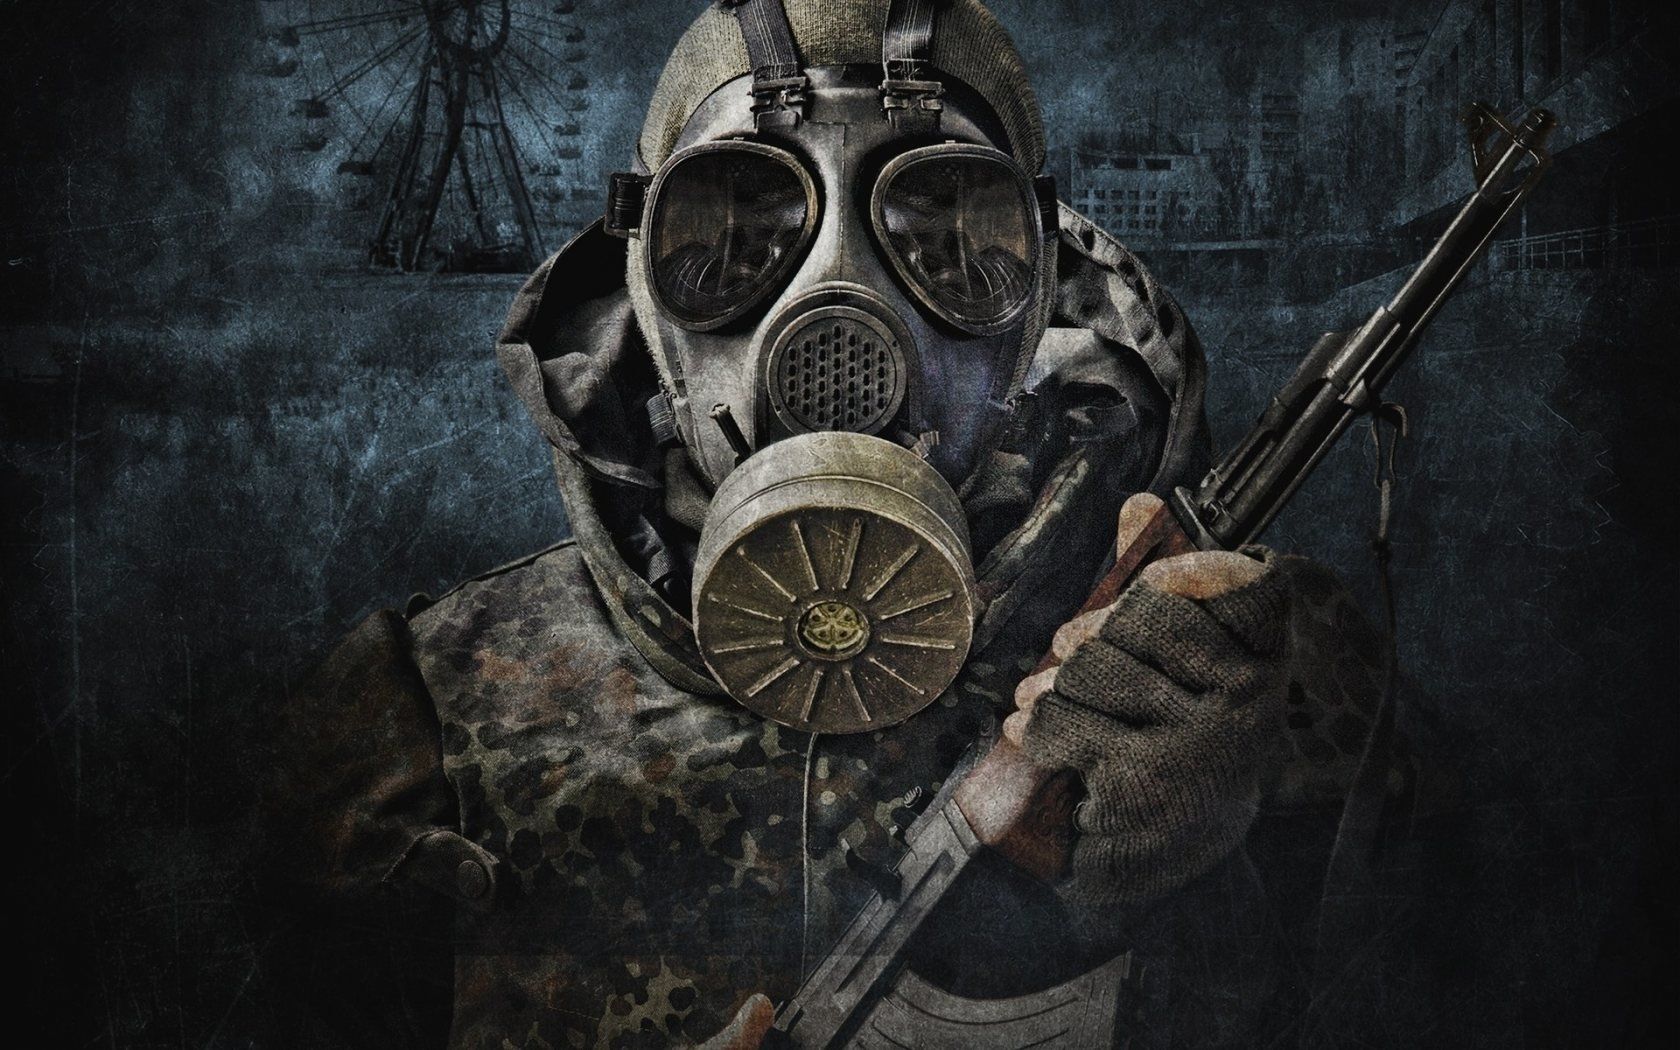 gas mask soldier wallpaper